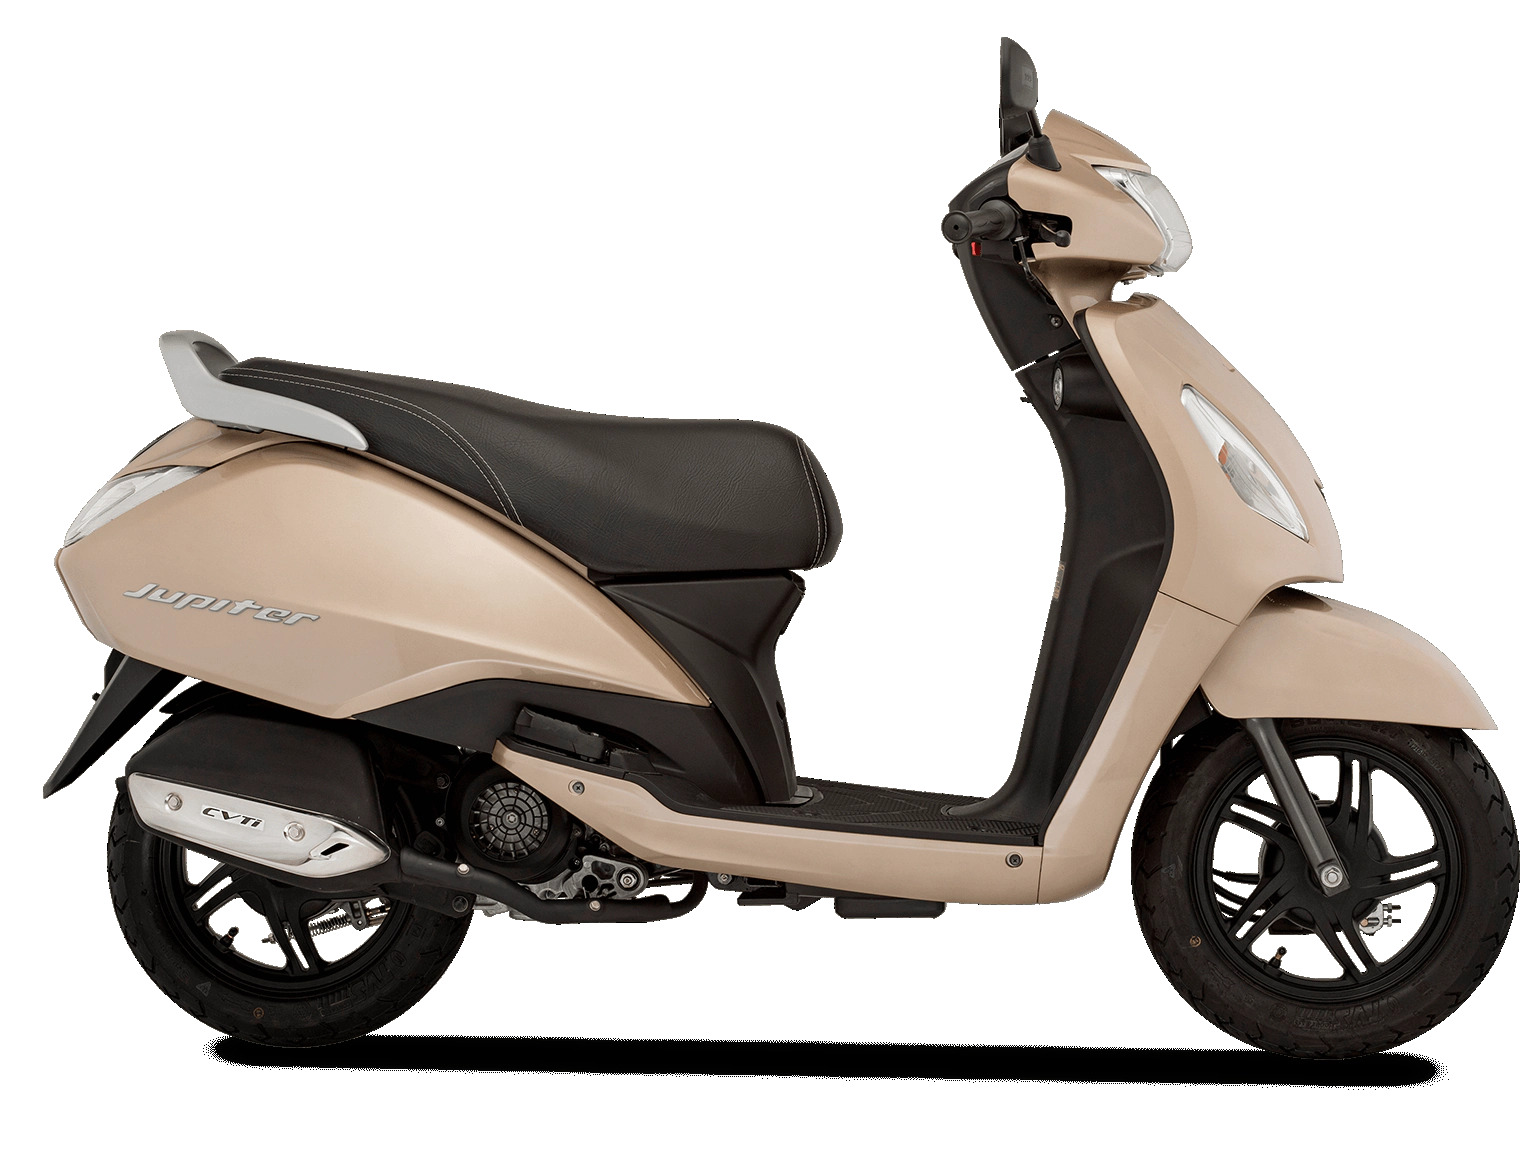 TVS JUPITER - Cheapest Scooty in India